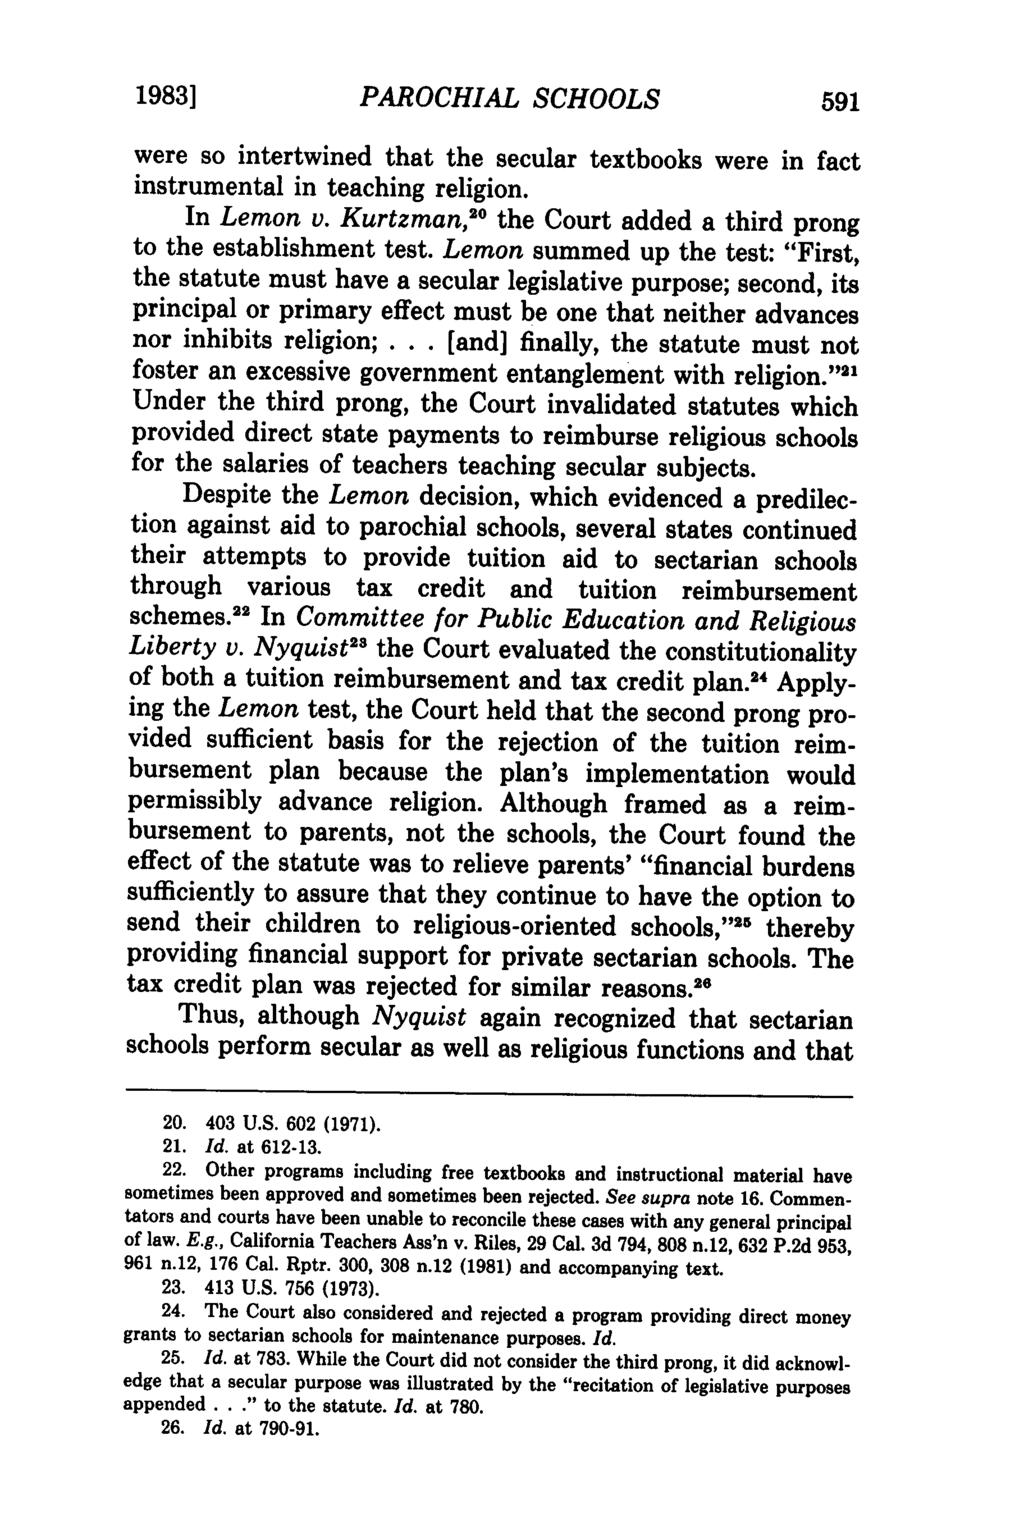 1983] PAROCHIAL SCHOOLS were so intertwined that the secular textbooks were in fact instrumental in teaching religion. In Lemon v. Kurtzman, o the Court added a third prong to the establishment test.